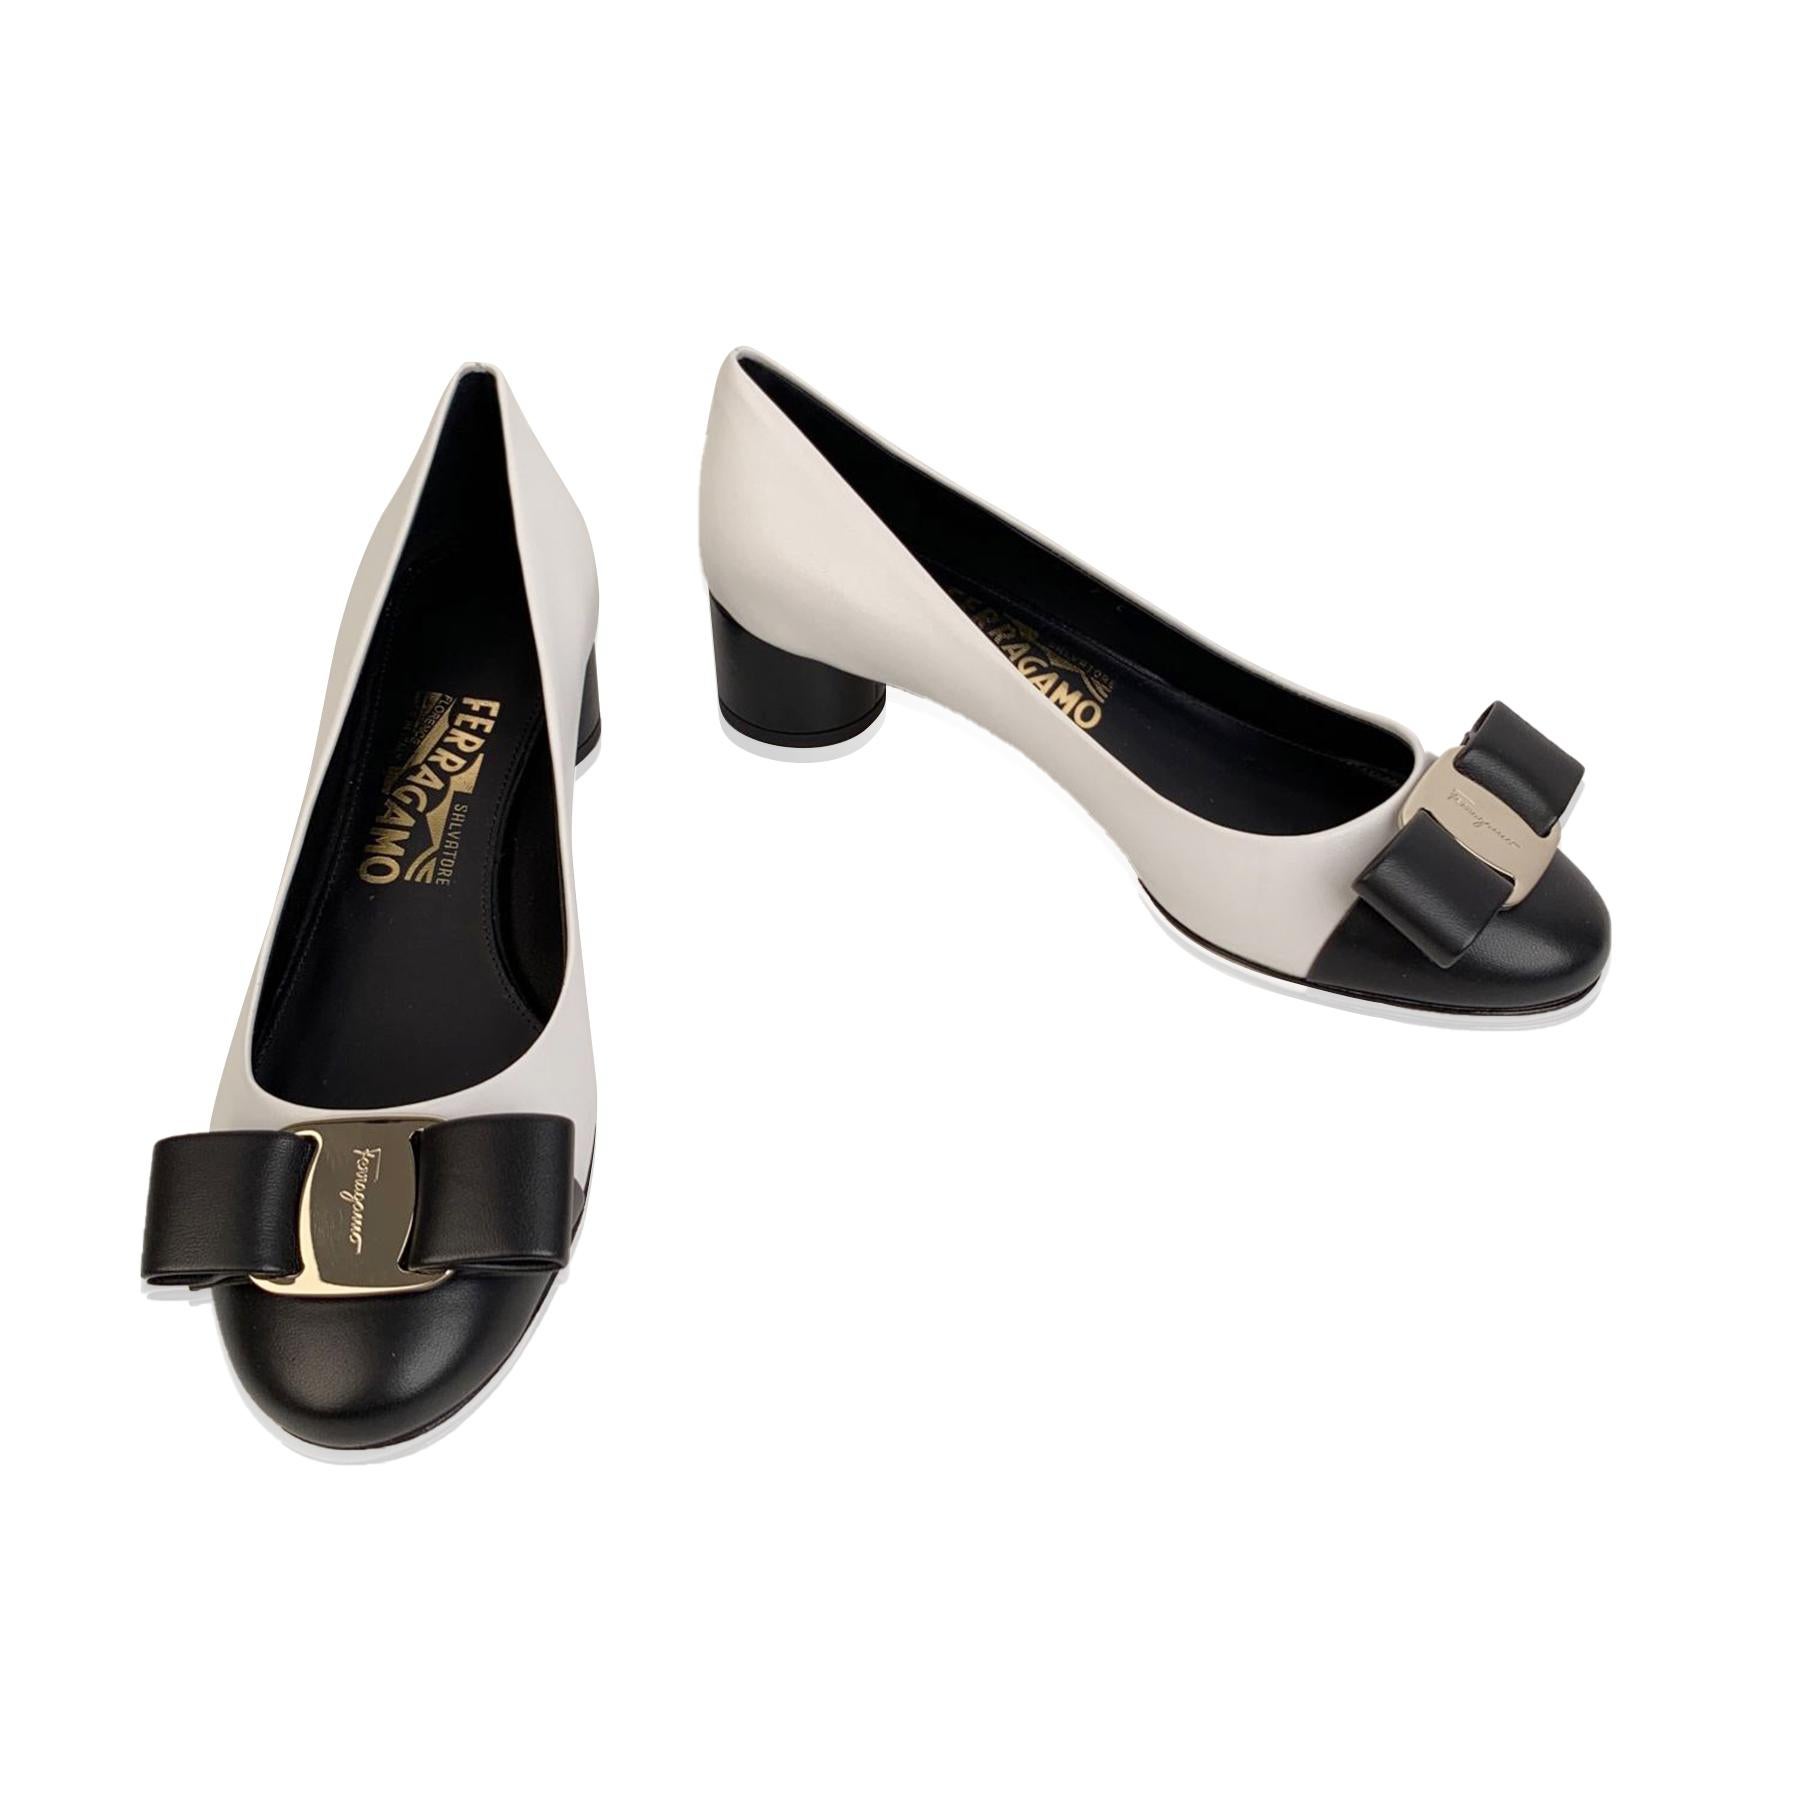 Beautiful Salvatore Ferragamo bicolor 'Ivrea Ct' pumps, from the 2018 Spring/Summer collection. Crafted in white leather with contrast black leather cap toe and heels. They feature a round toe, slip-on design, Vara-bow detailing with gold metal